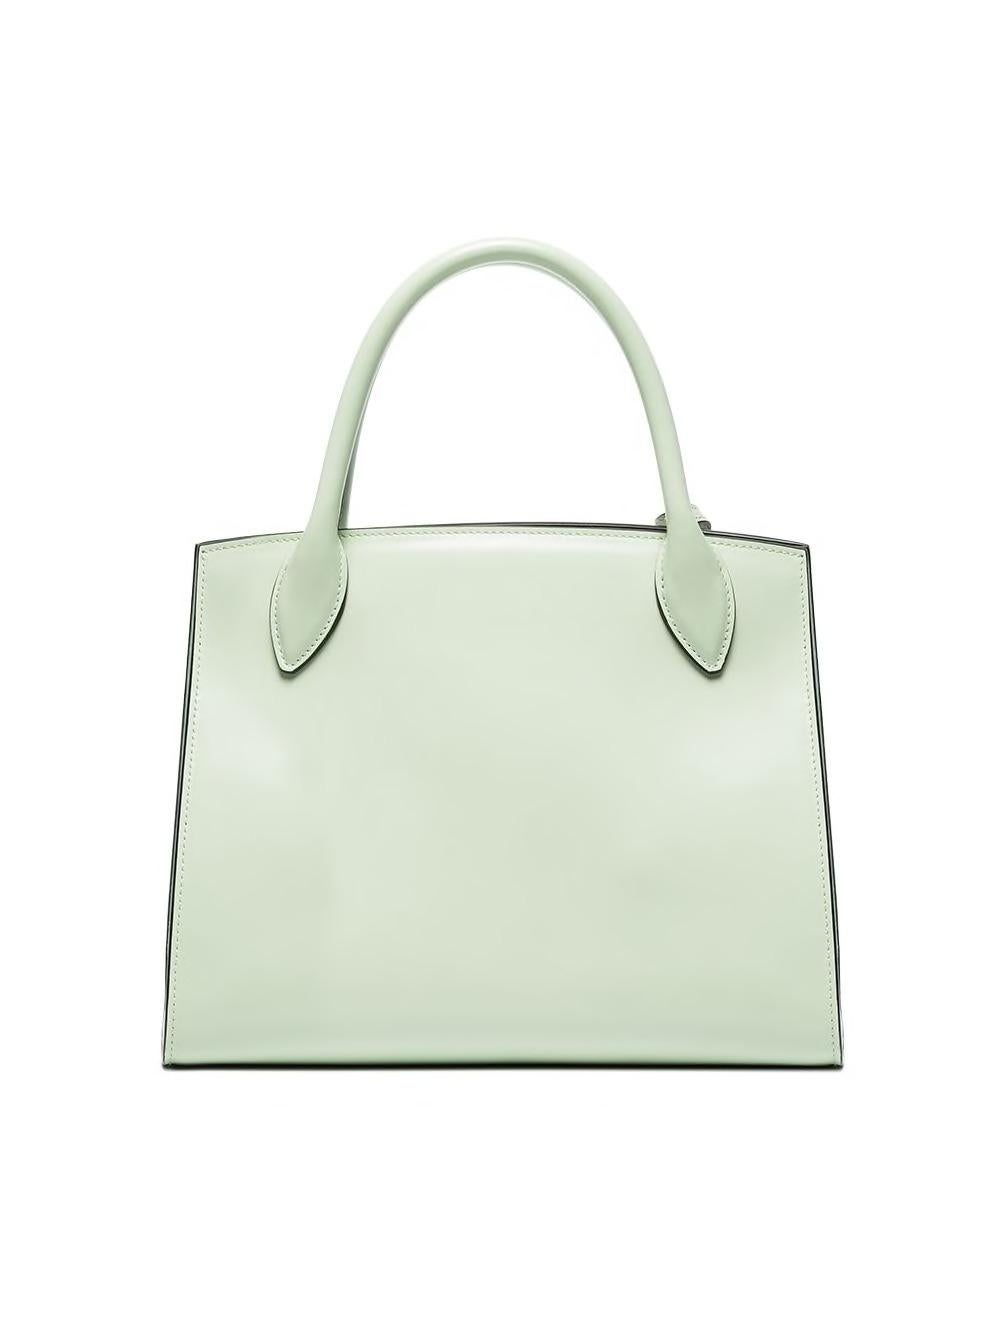 Prada Mint Green Leather Satchel

This satchel features a leather body, rolled leather handles, a detachable flat leather strap, an open-top, and interior slip pockets.

Please note, these items are pre-owned and may show signs of being stored even